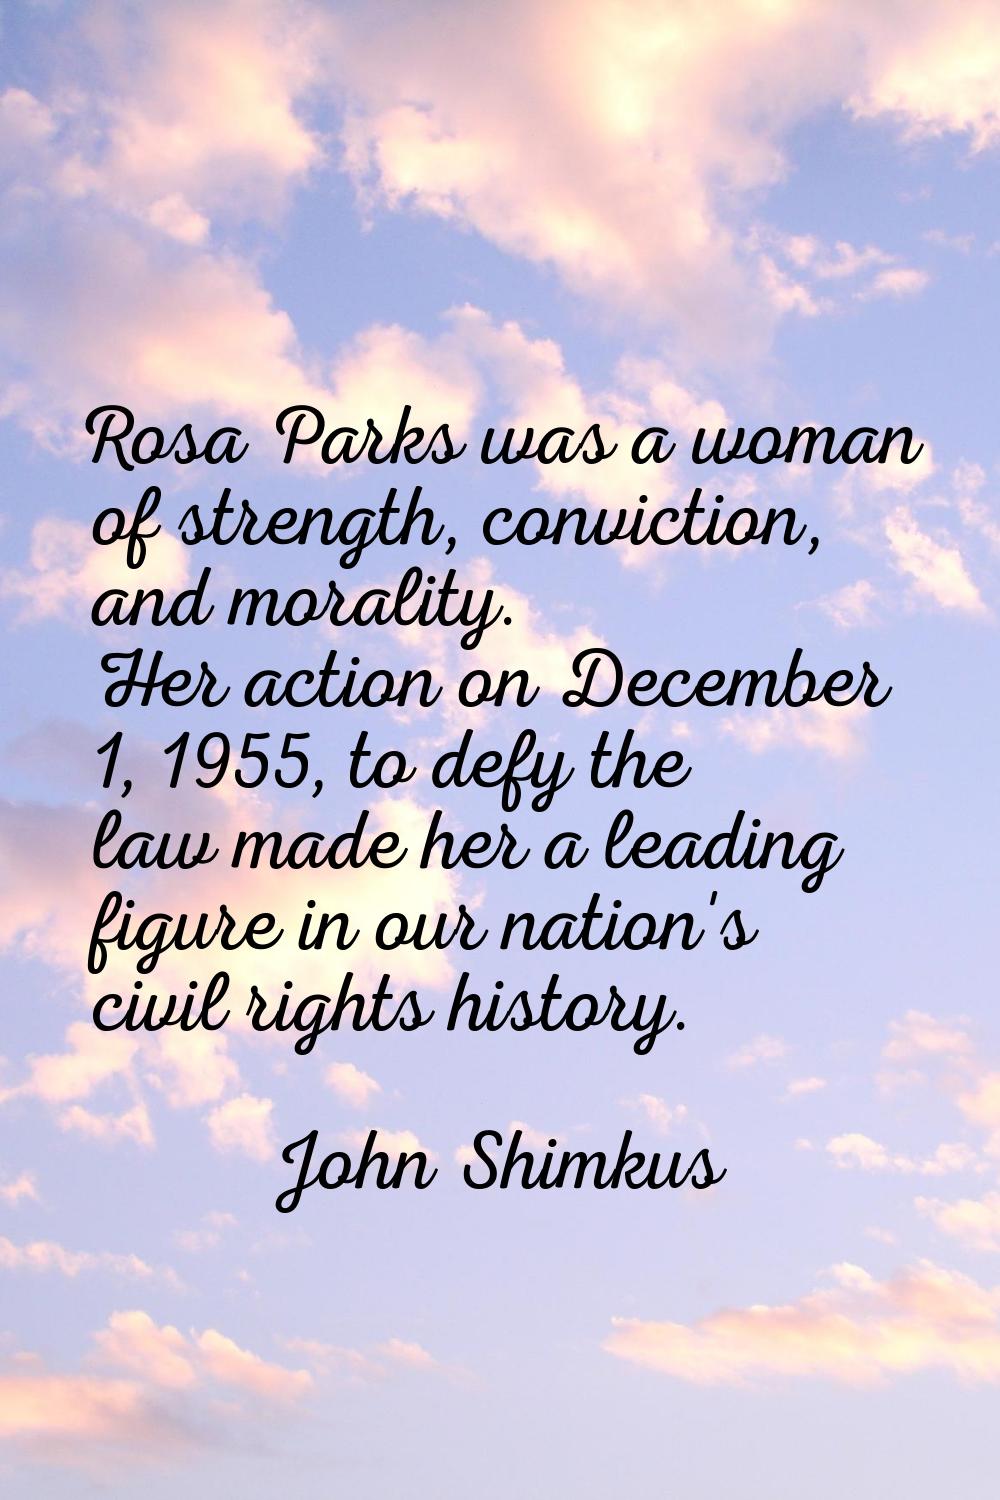 Rosa Parks was a woman of strength, conviction, and morality. Her action on December 1, 1955, to de